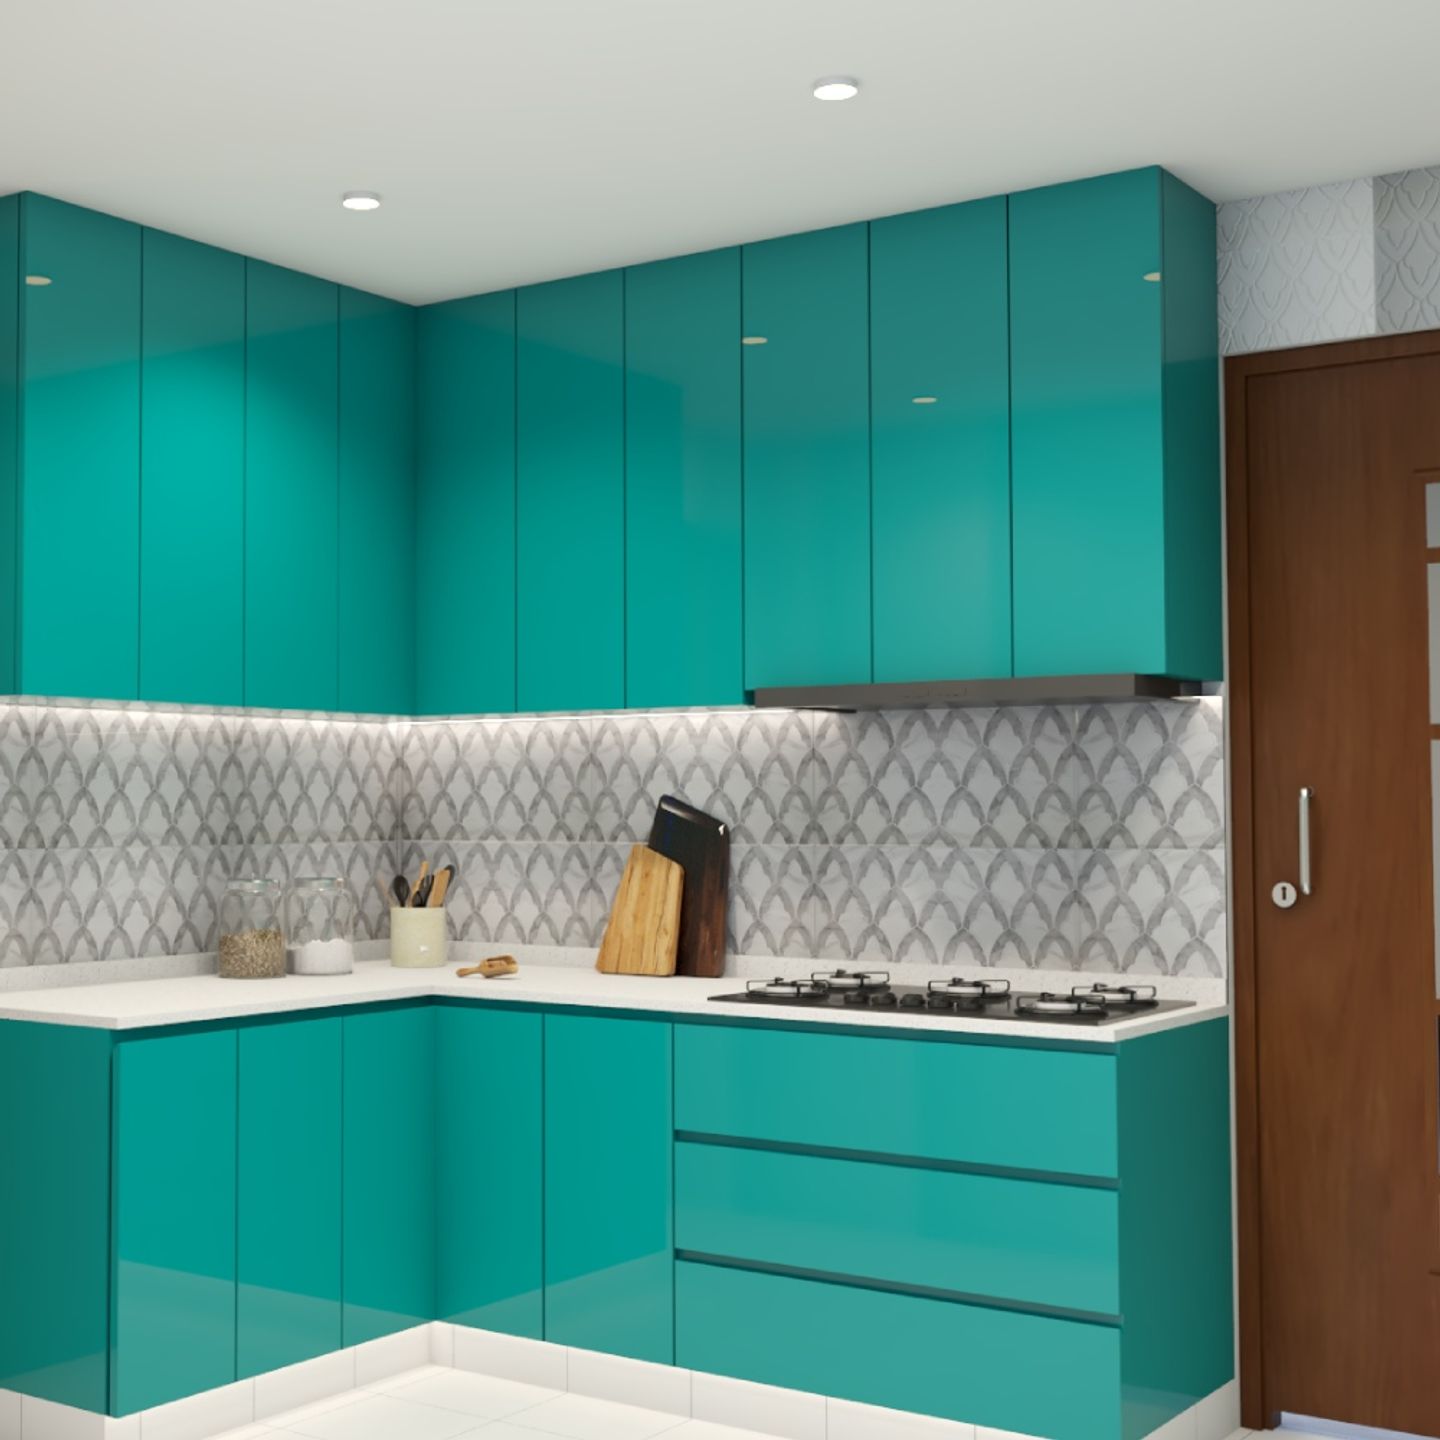 Modern L-Shaped Kitchen Cabinet Design With Spacious Teal Cabinets